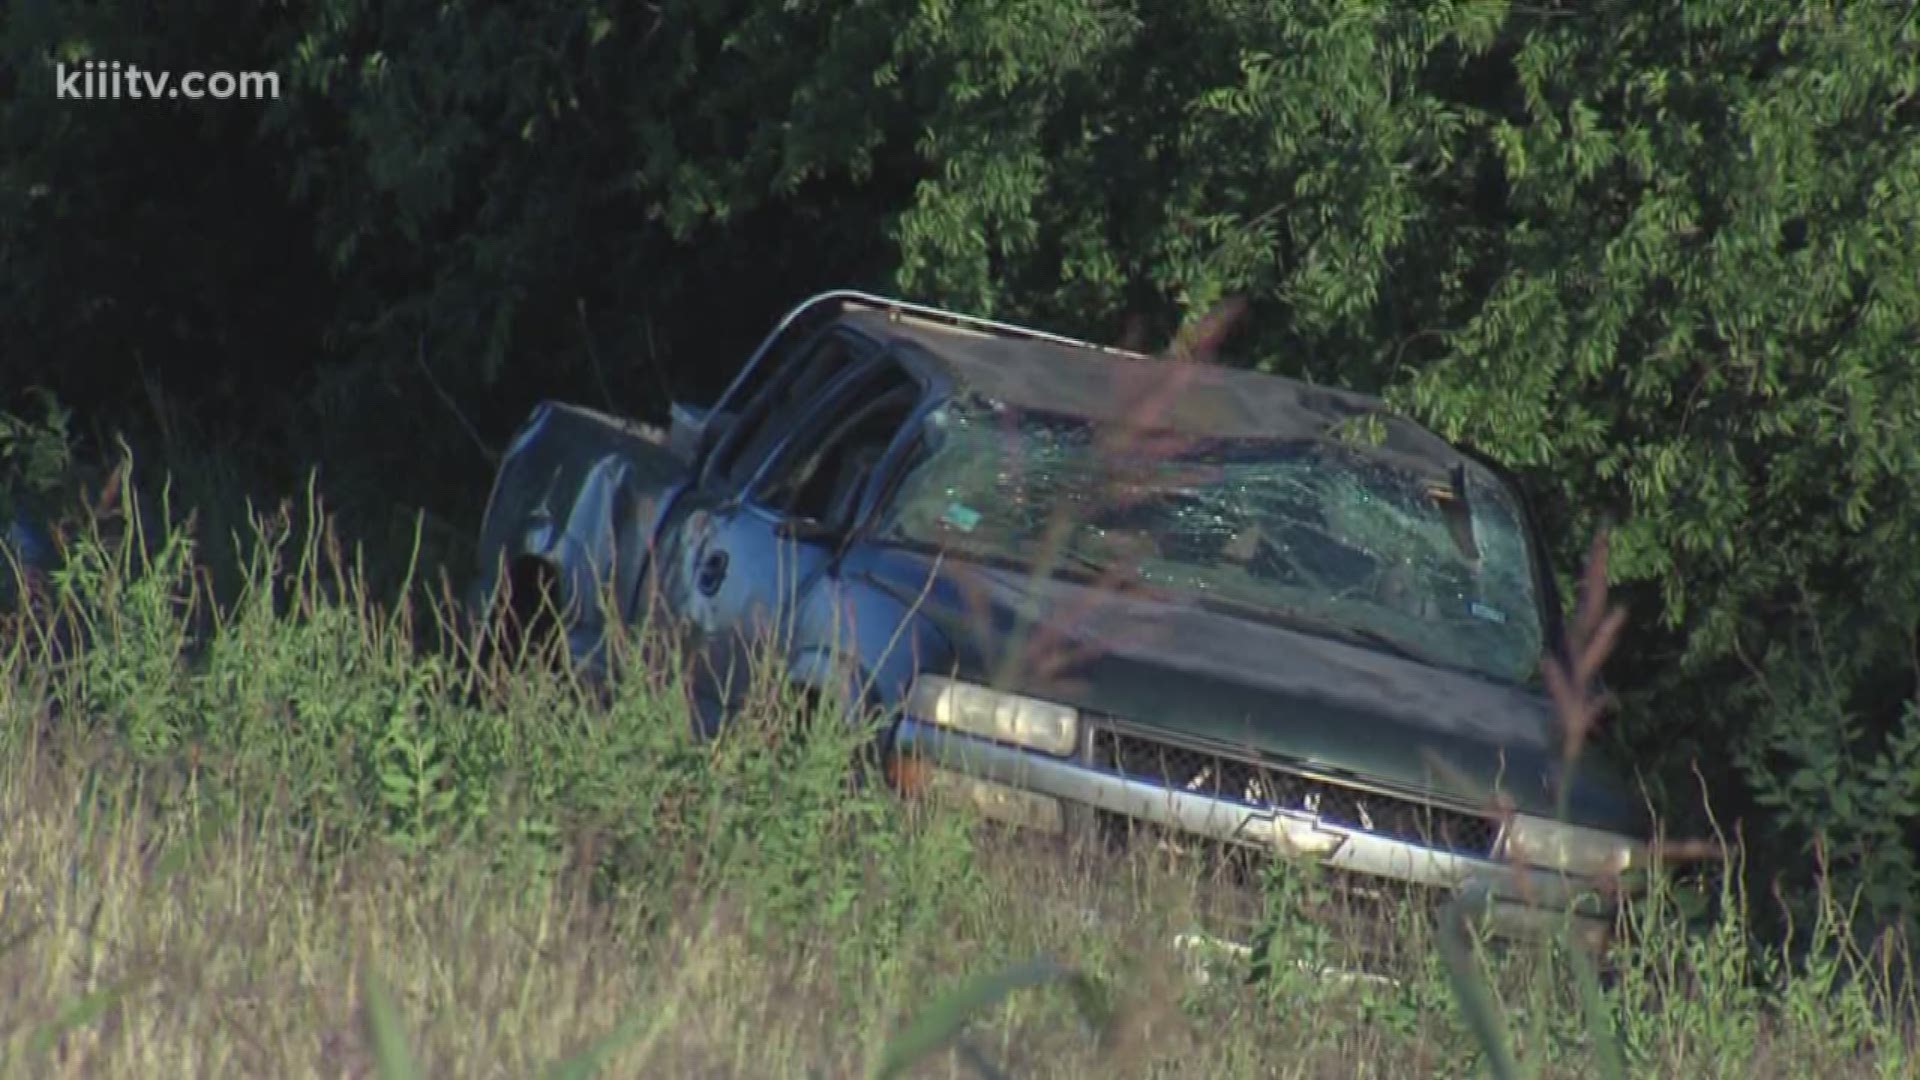 Police said a car cut off a pickup which caused the driver to lose control, spin and go into the embankment.